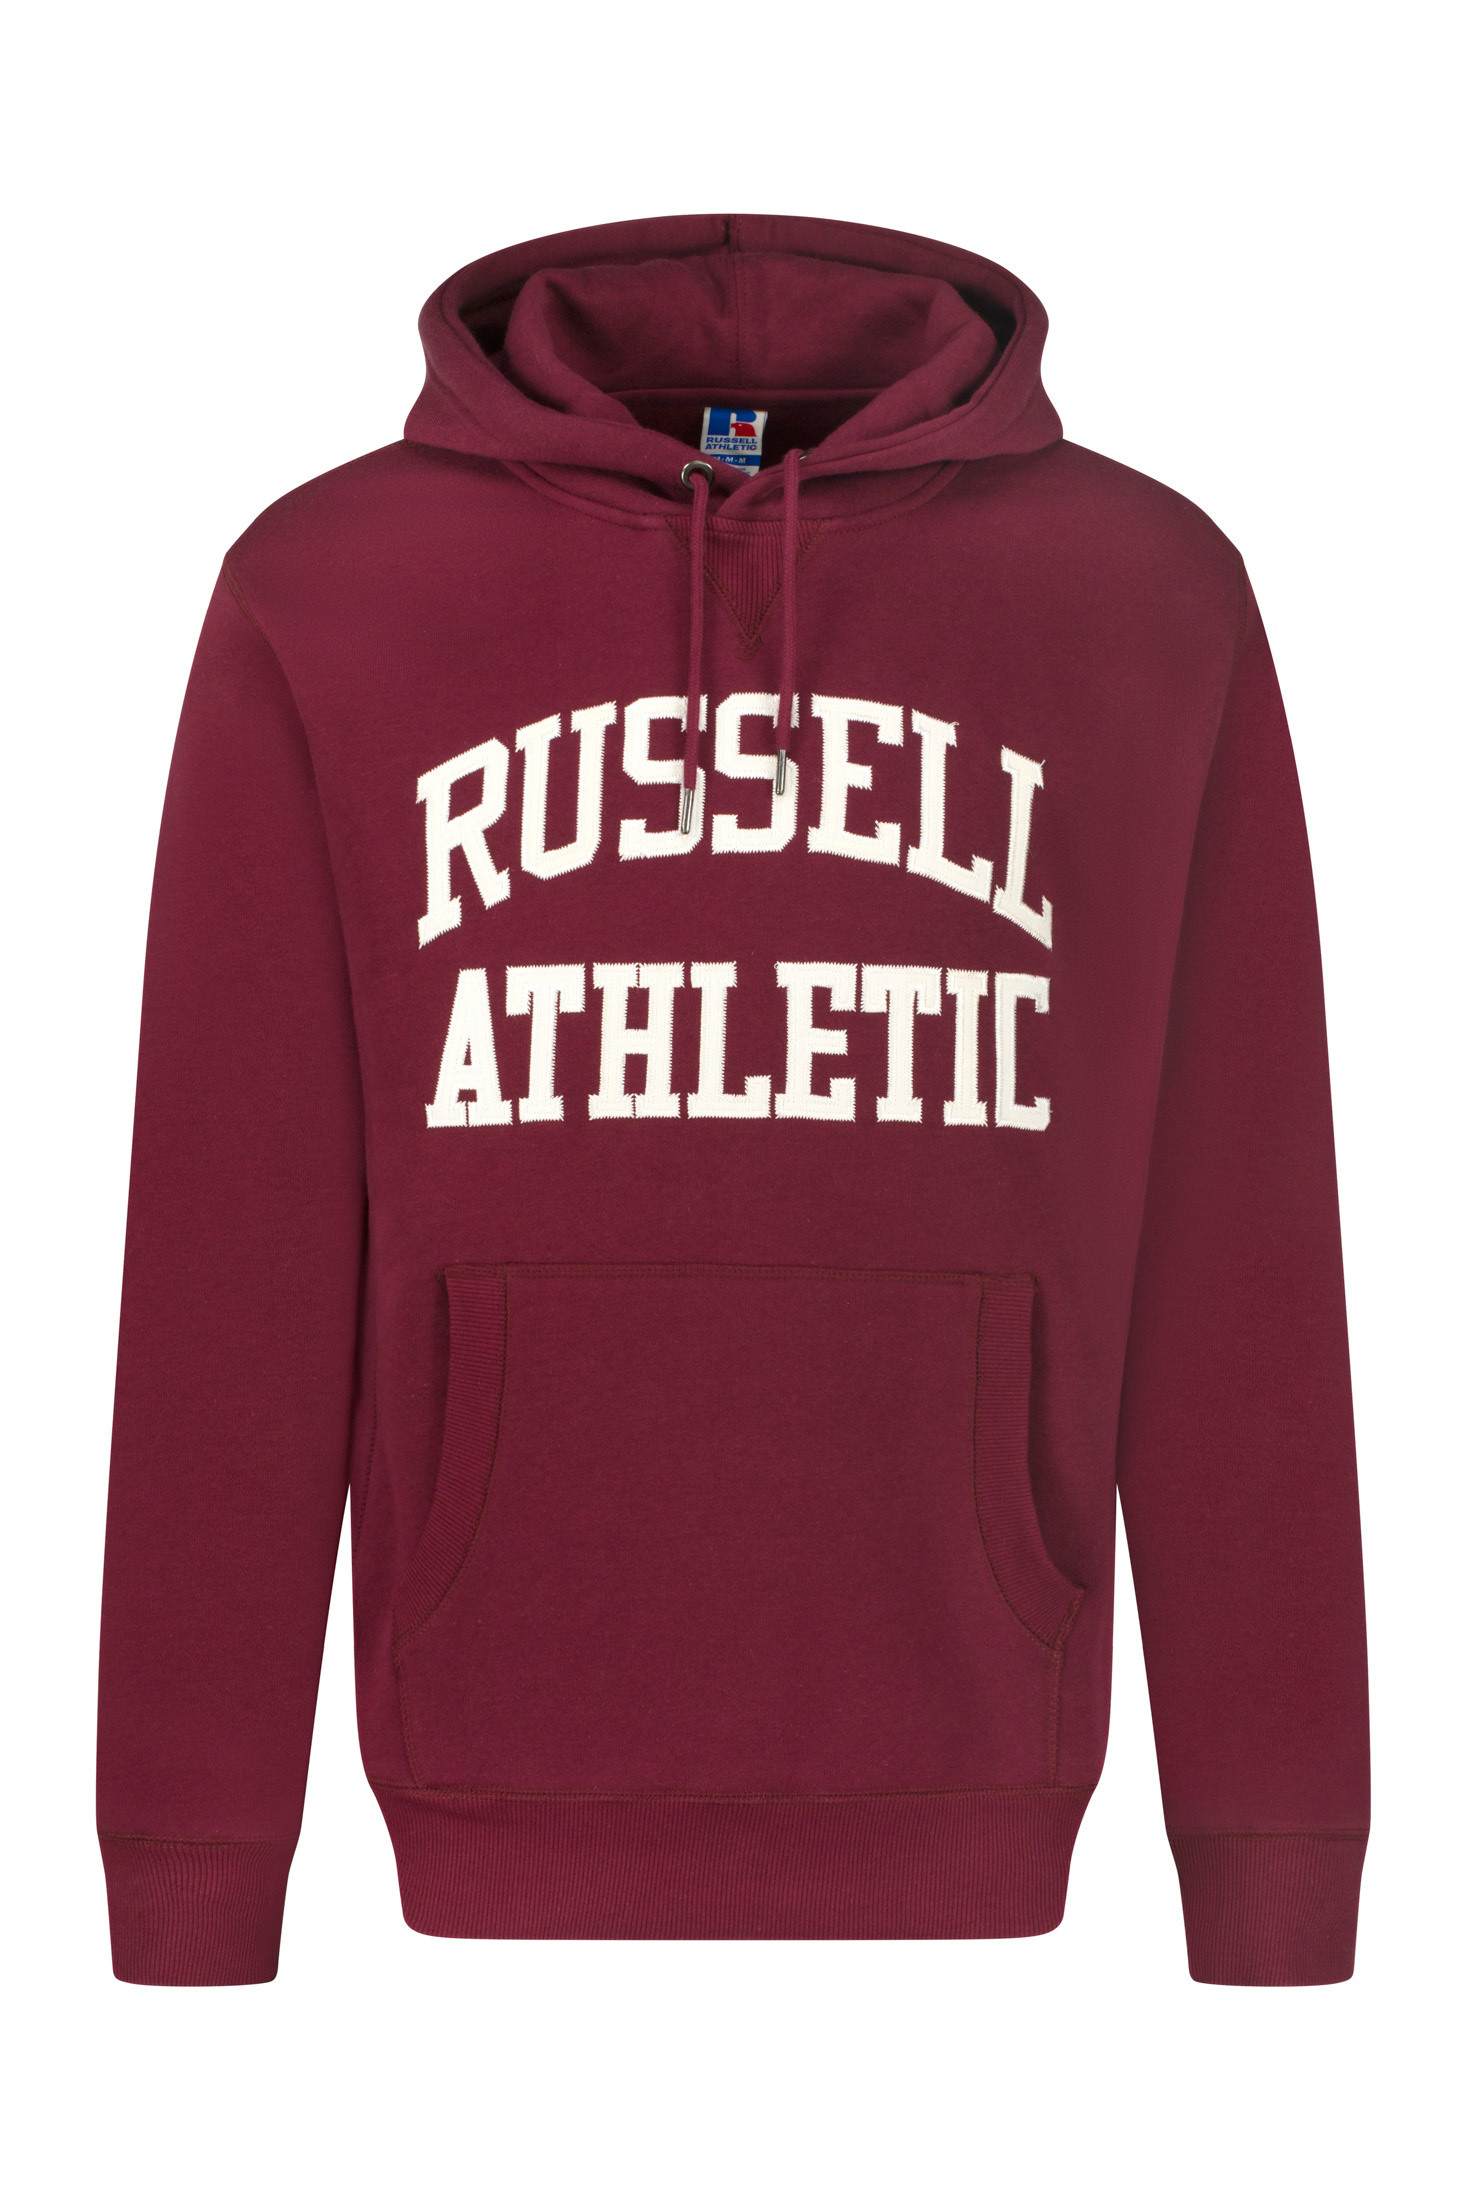 Russell Athletic - Felpa con cappuccio, Rosso bordeaux, large image number 0